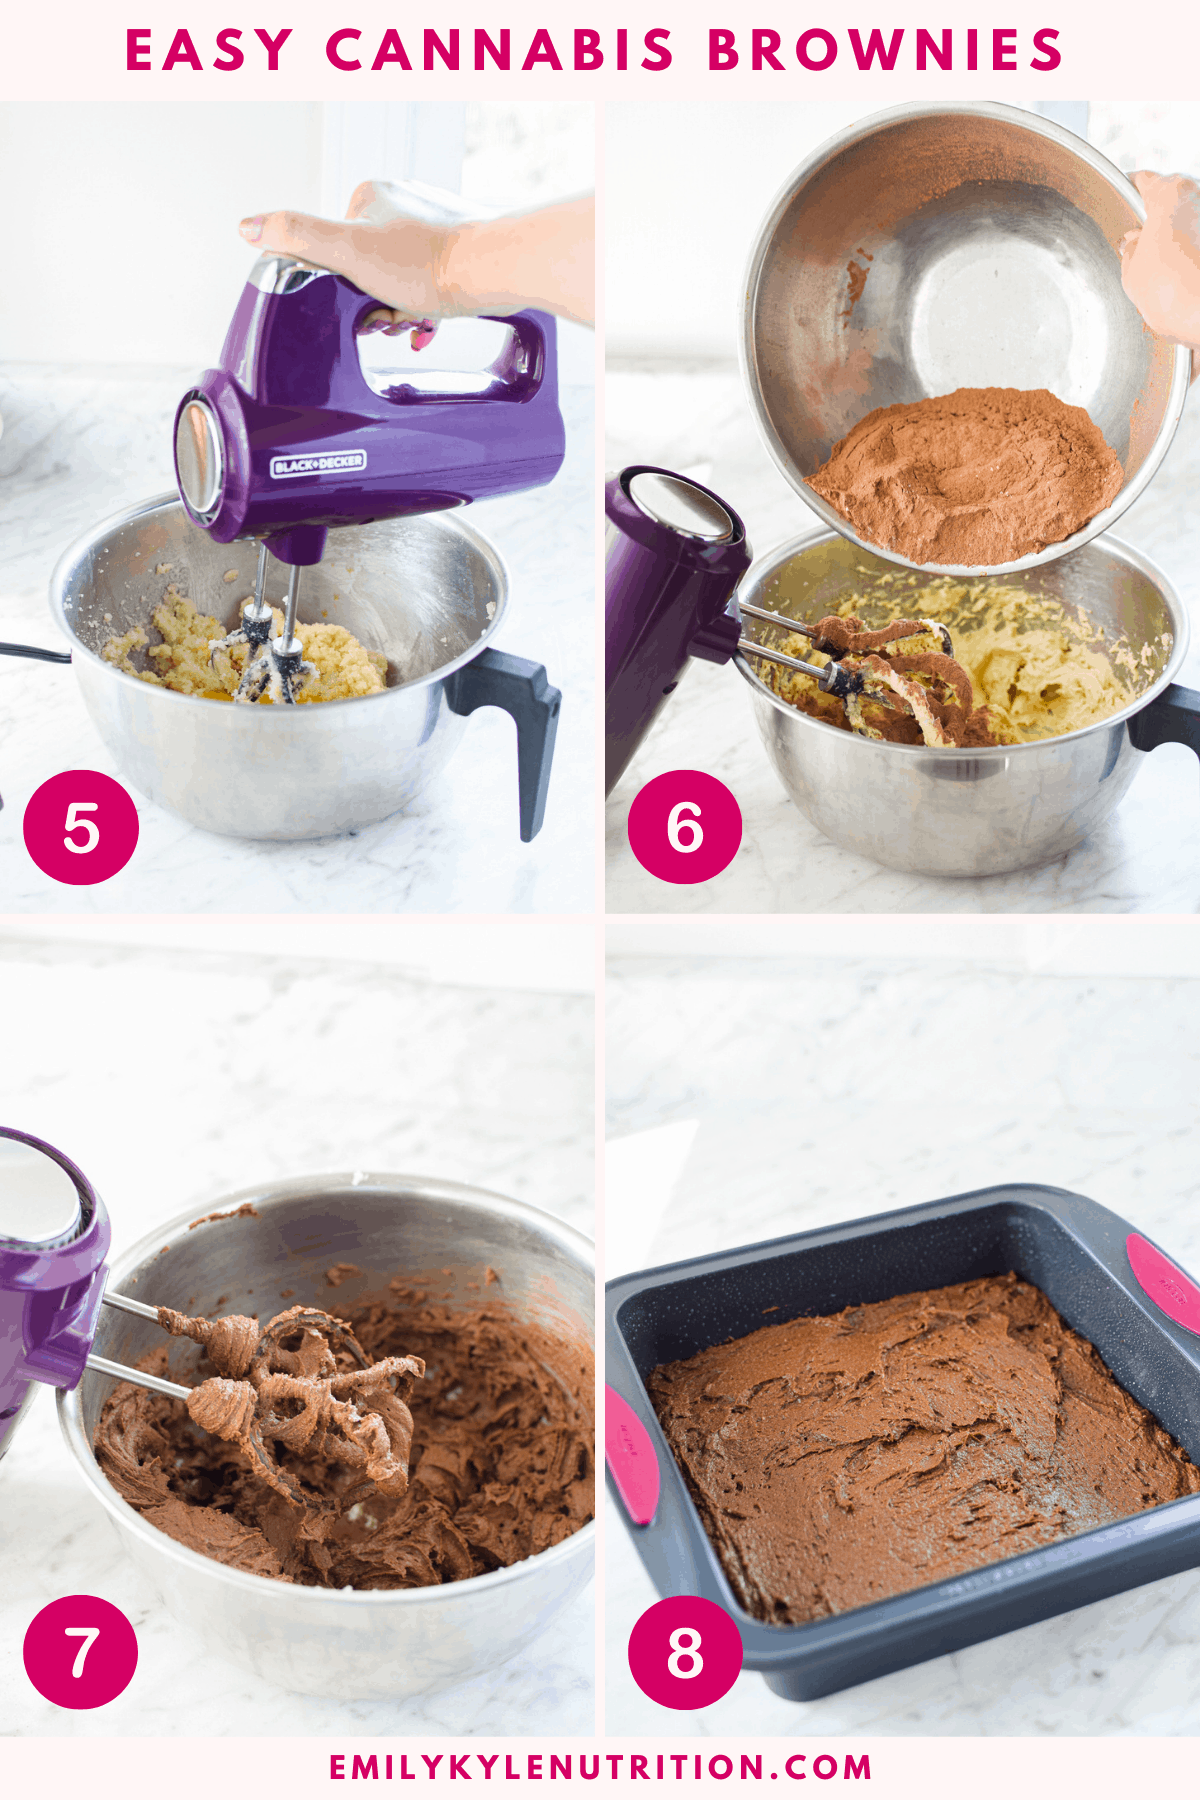 A 4 step image collage showing how to make brownies septs 4-8 including mixing the dry ingredients with the wet ingredients, the batter in a bowl, and the batter in the baking pan.